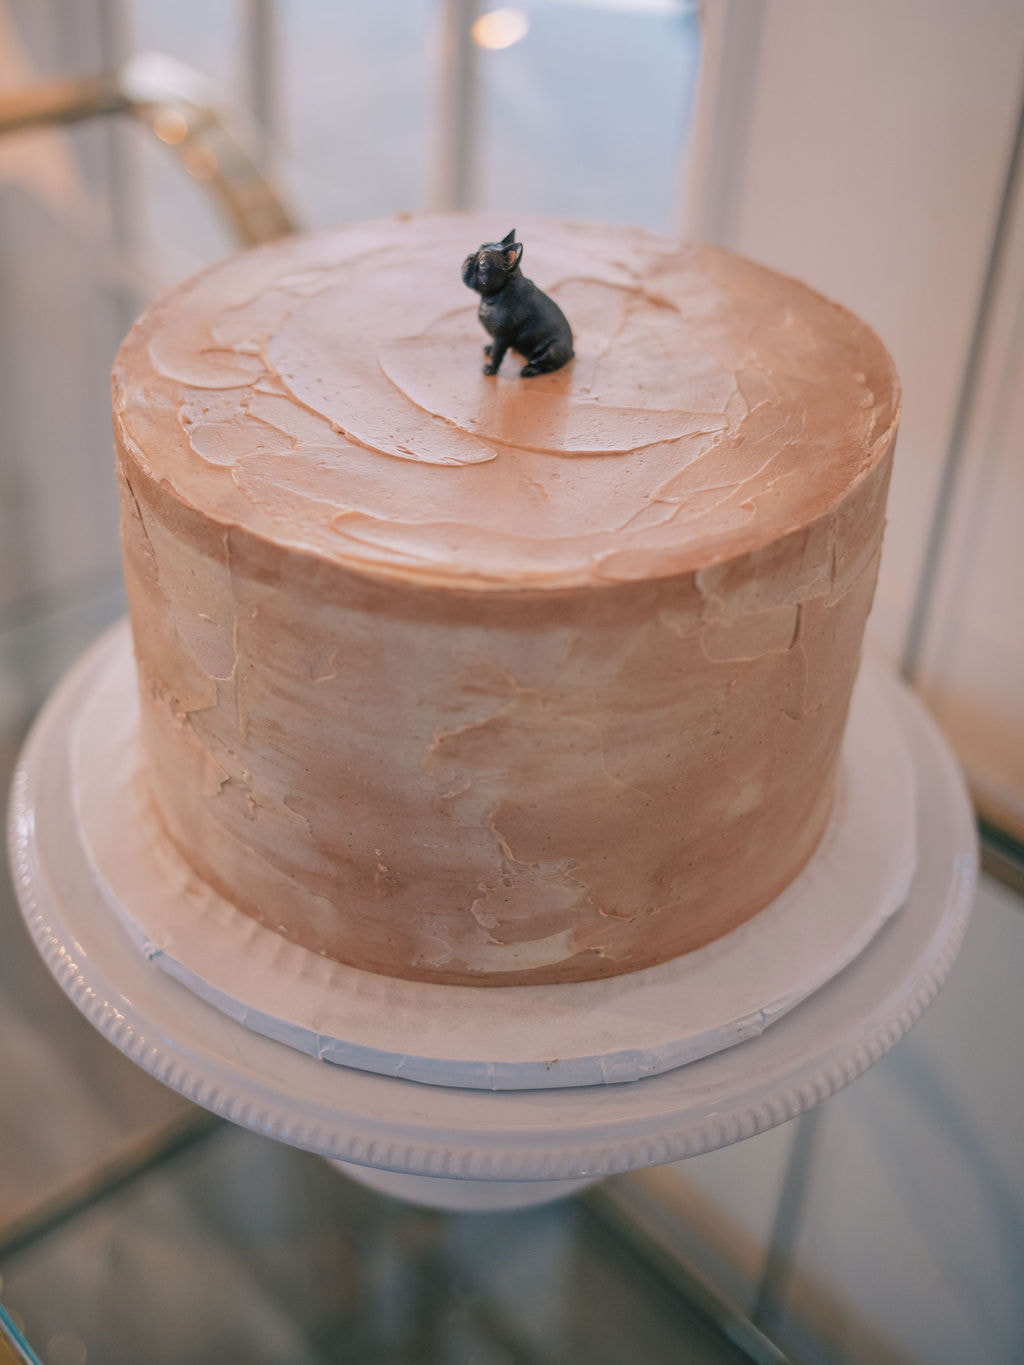 chocolate groom's cake with mini french bulldog topper